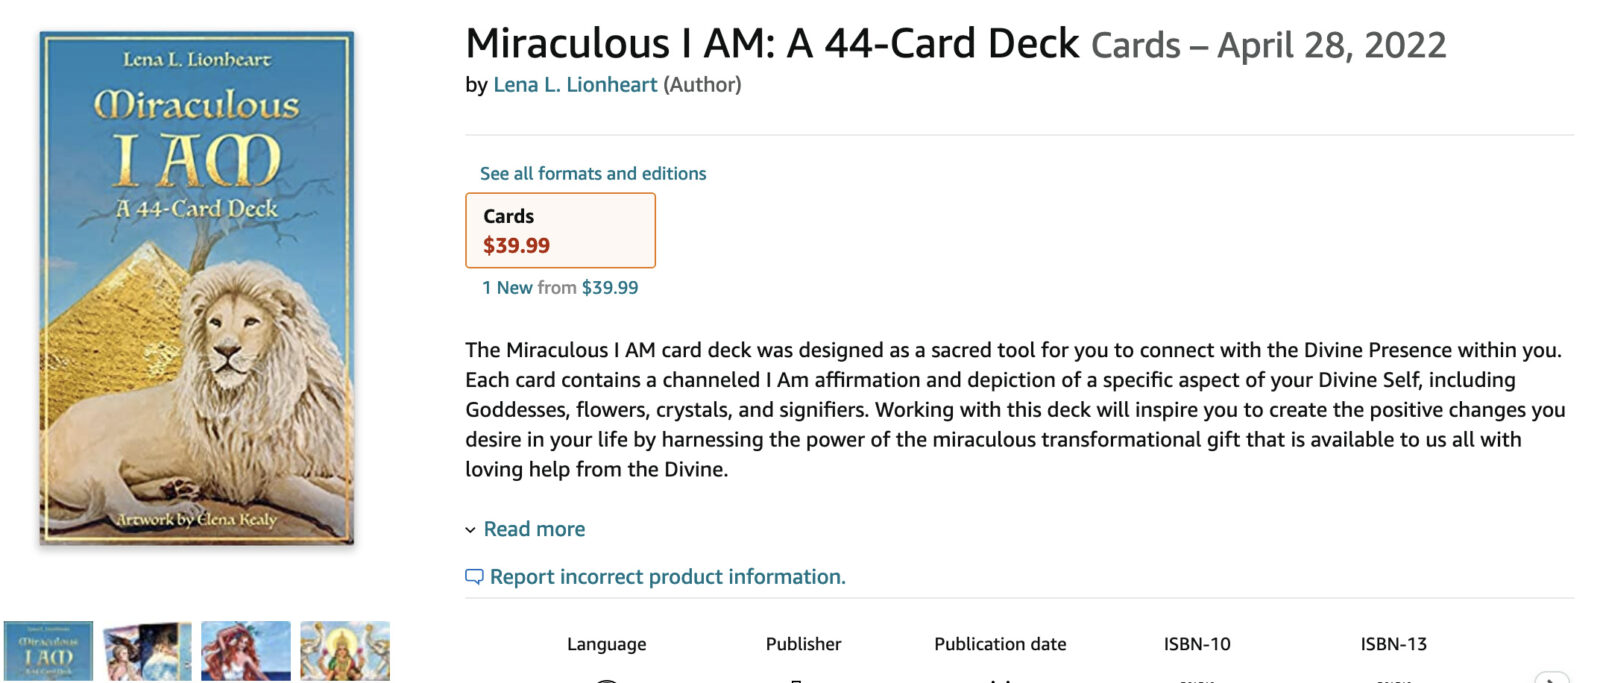 Miraculous I AM Oracle Cards by Lena L. Lionheart (Amazon listing).